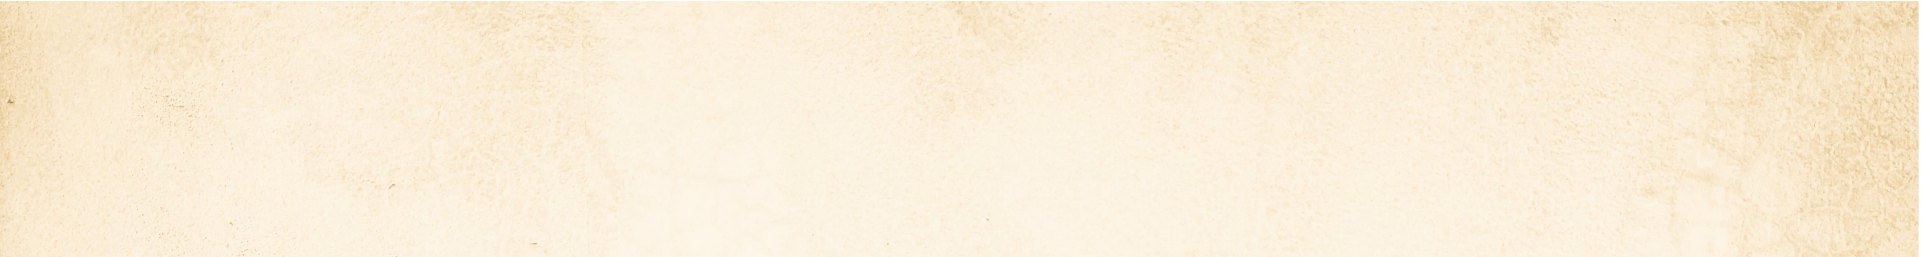 Footer background image representing sand